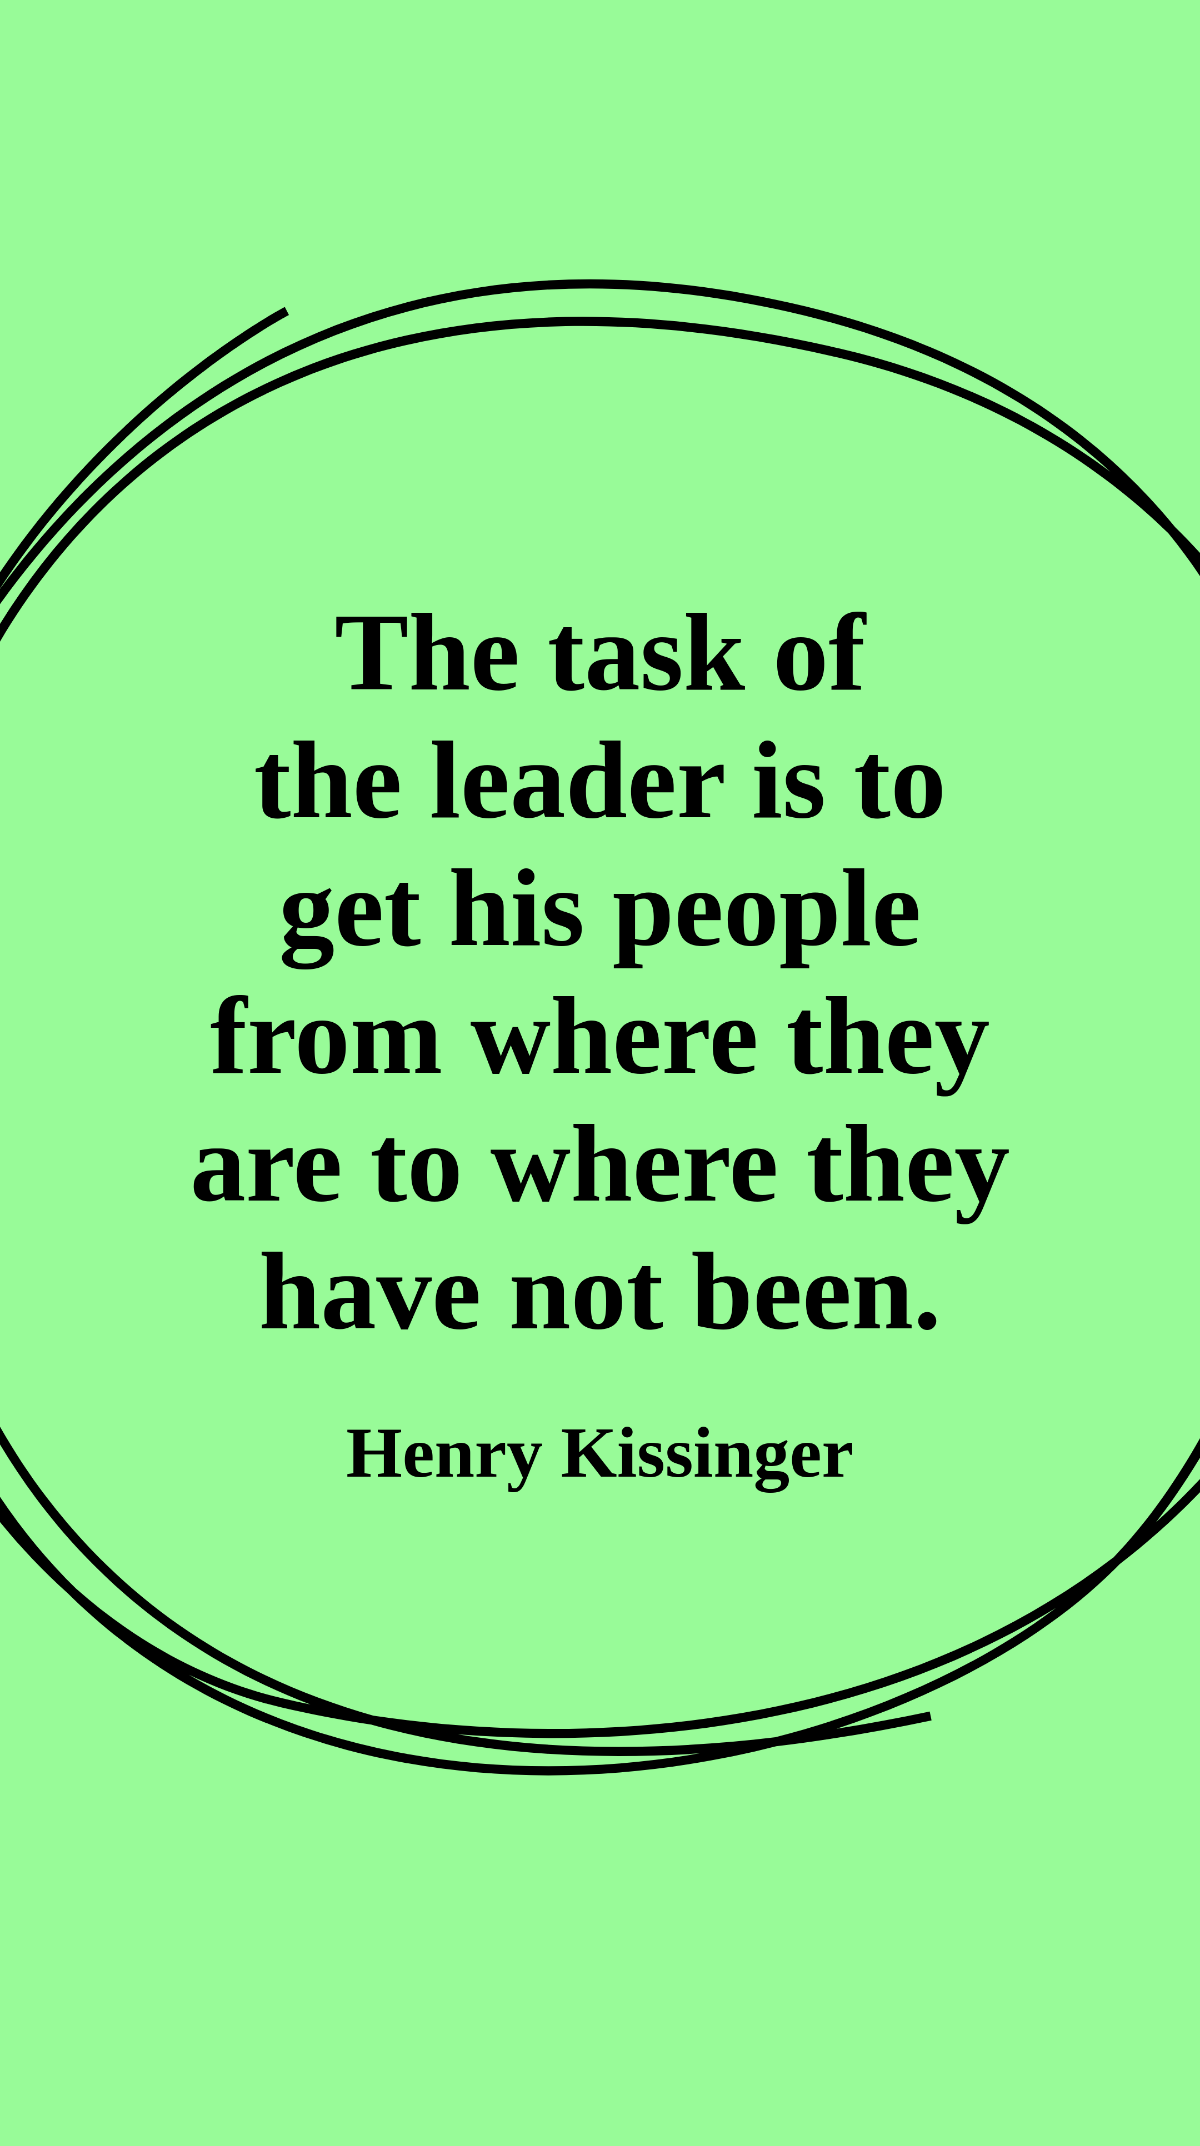 Henry Kissinger - The task of the leader is to get his people from where they are to where they have not been. Template